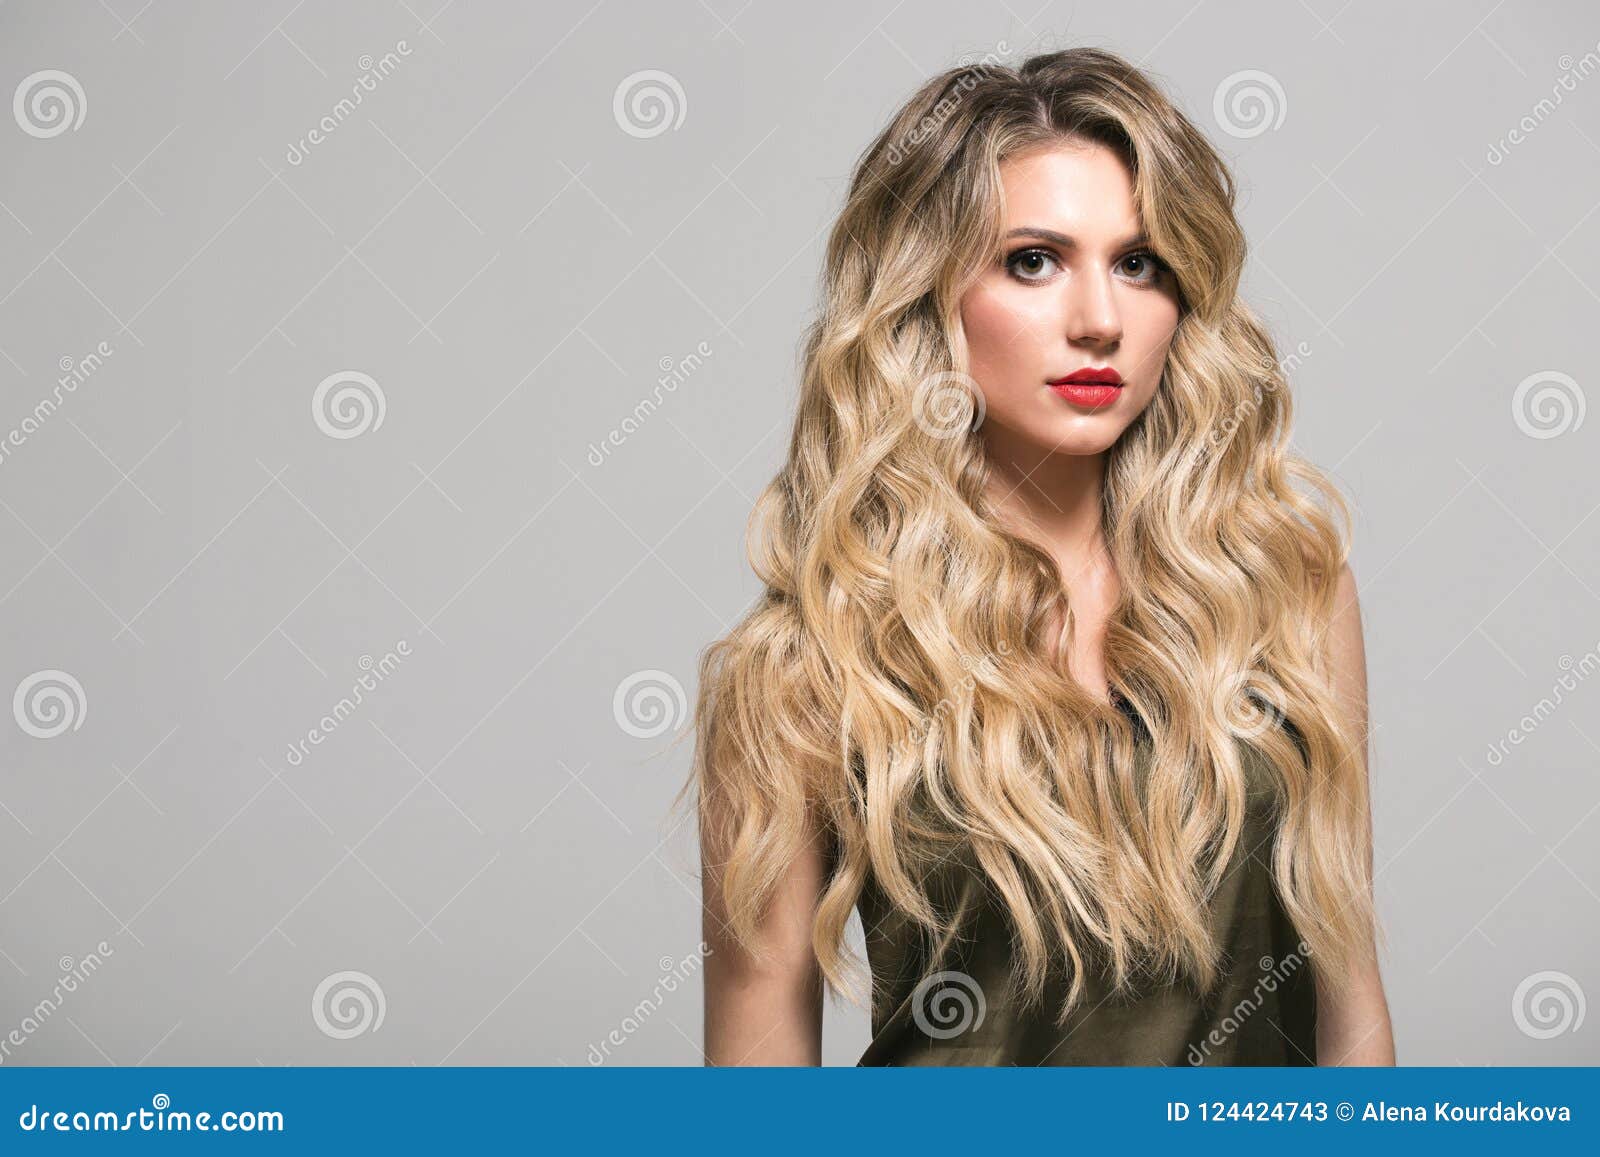 1300 Short Wavy Hair Stock Photos Pictures  RoyaltyFree Images   iStock  Short wavy hair white background